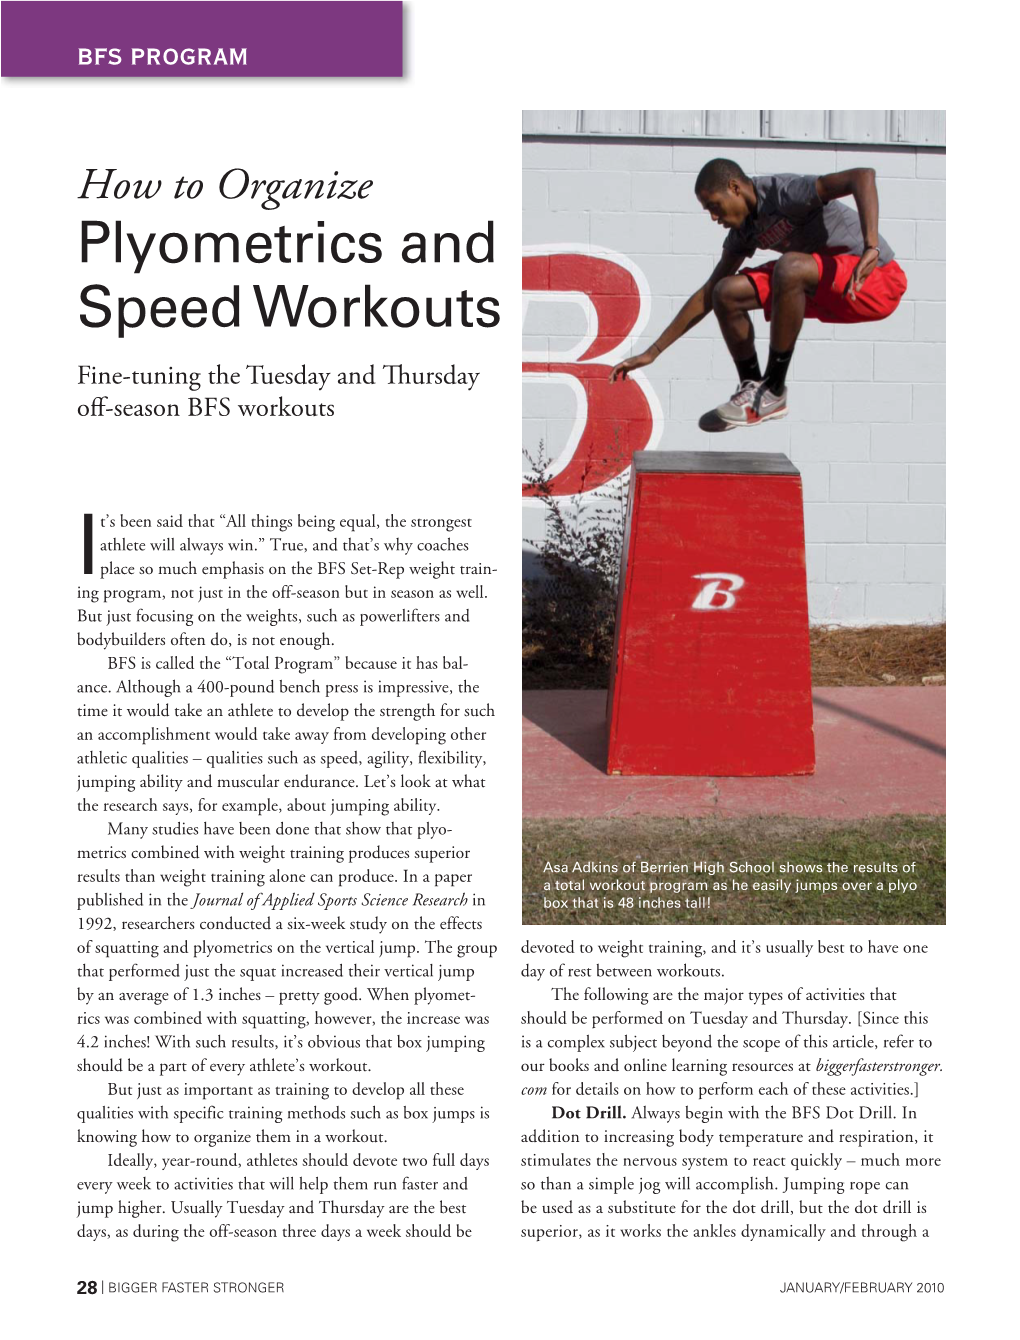 Plyometrics and Speed Workouts Fine-Tuning the Tuesday and Th Ursday Off -Season BFS Workouts